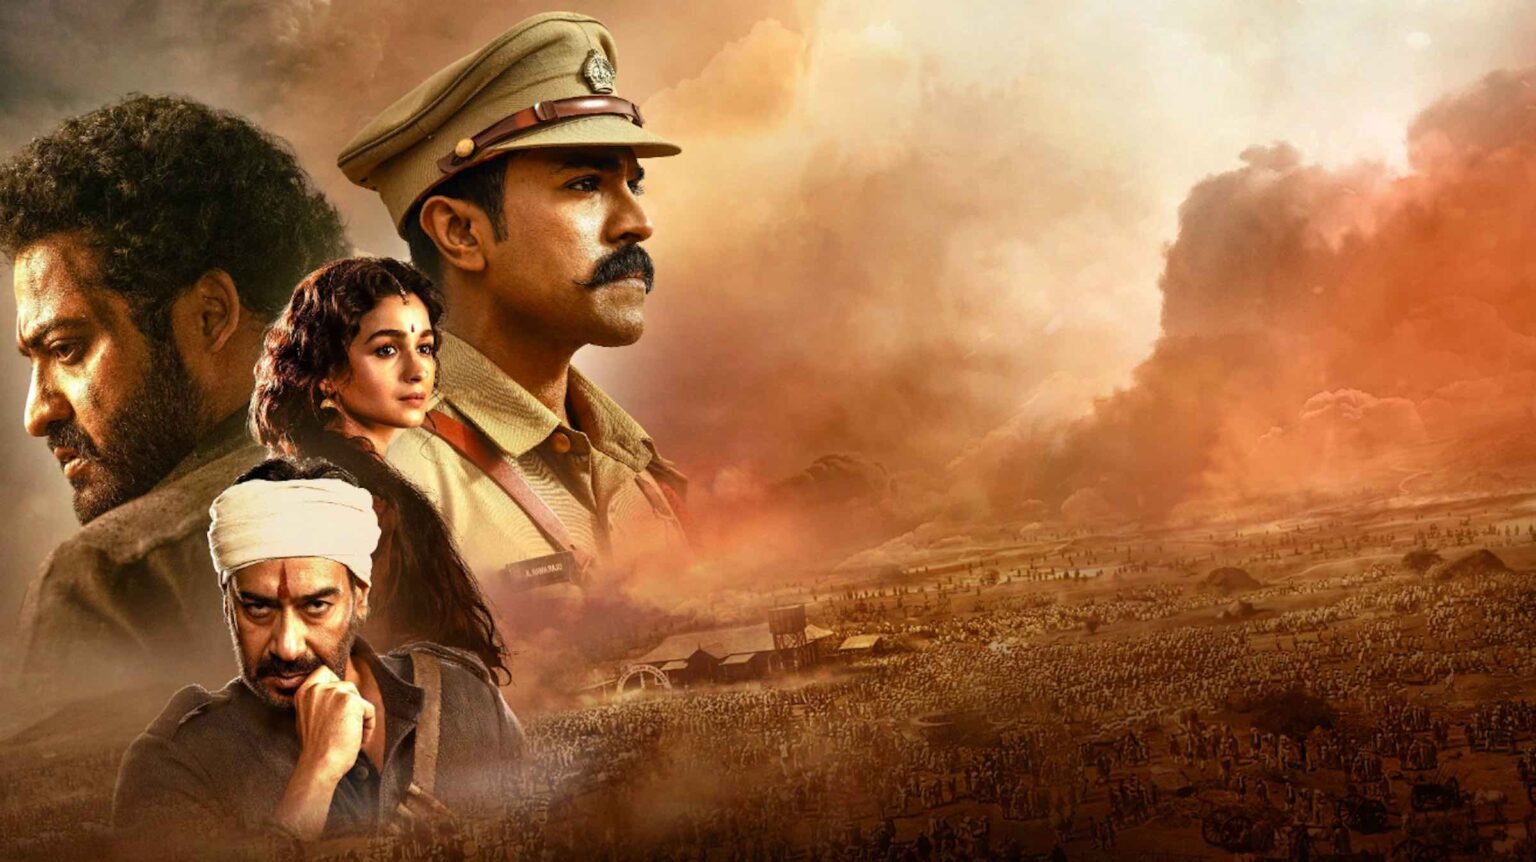 Spring always brings the best releases as well as the perfect time to watch them. Here's how to watch 'RRR' and other new movies online for free.